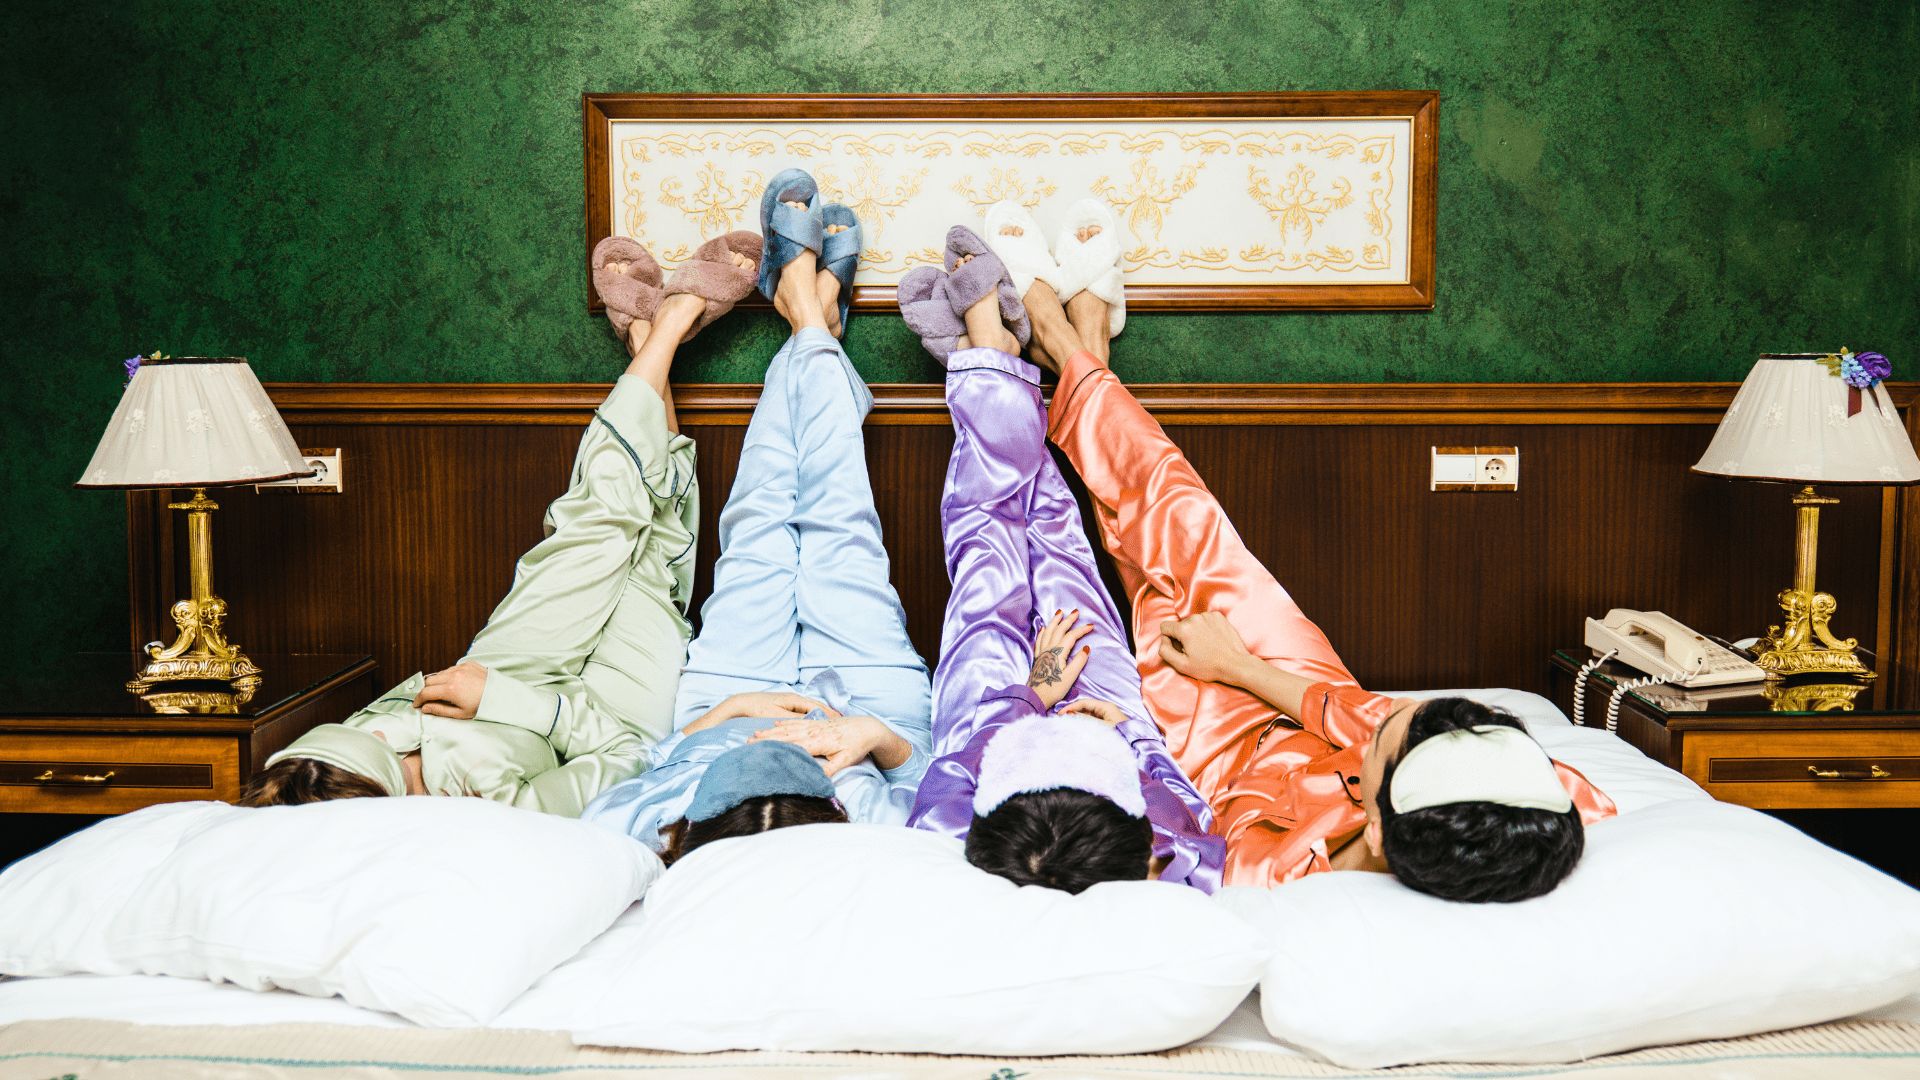 7 Pajama Party Ideas For An Unforgettable Sleepover